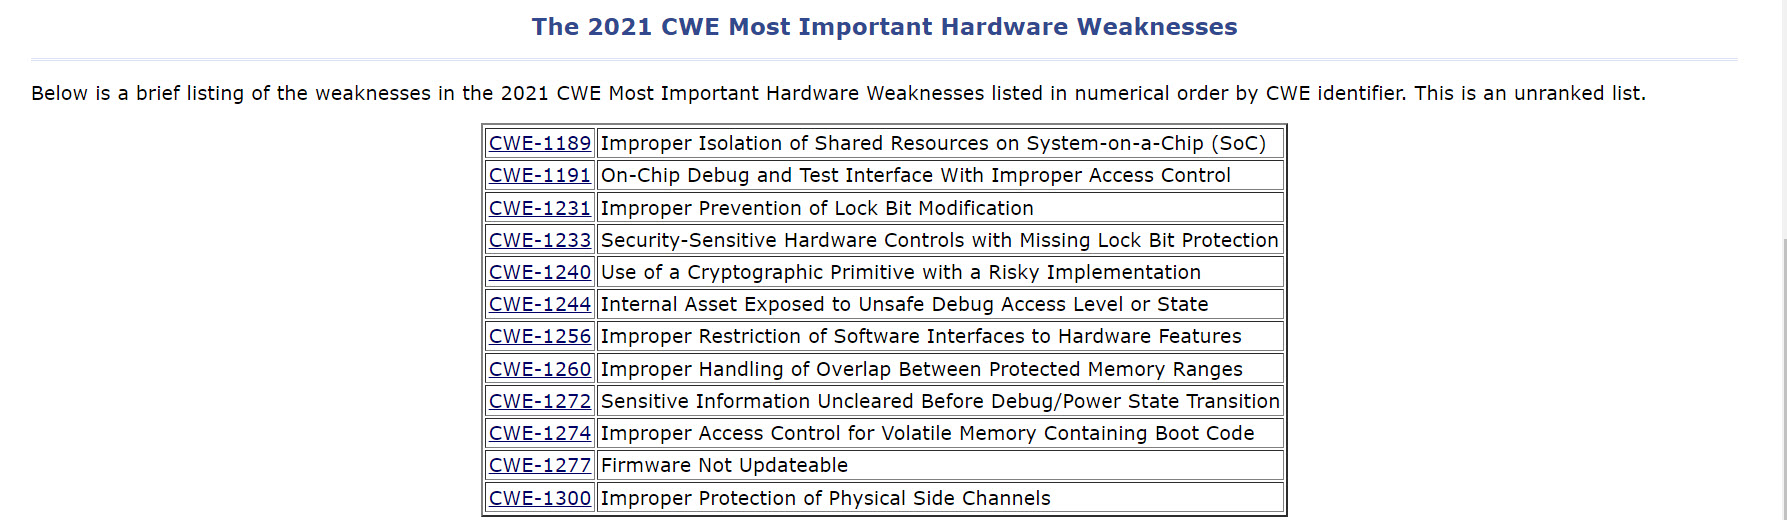 The 2021 CWE Most Important Hardware Weaknesses